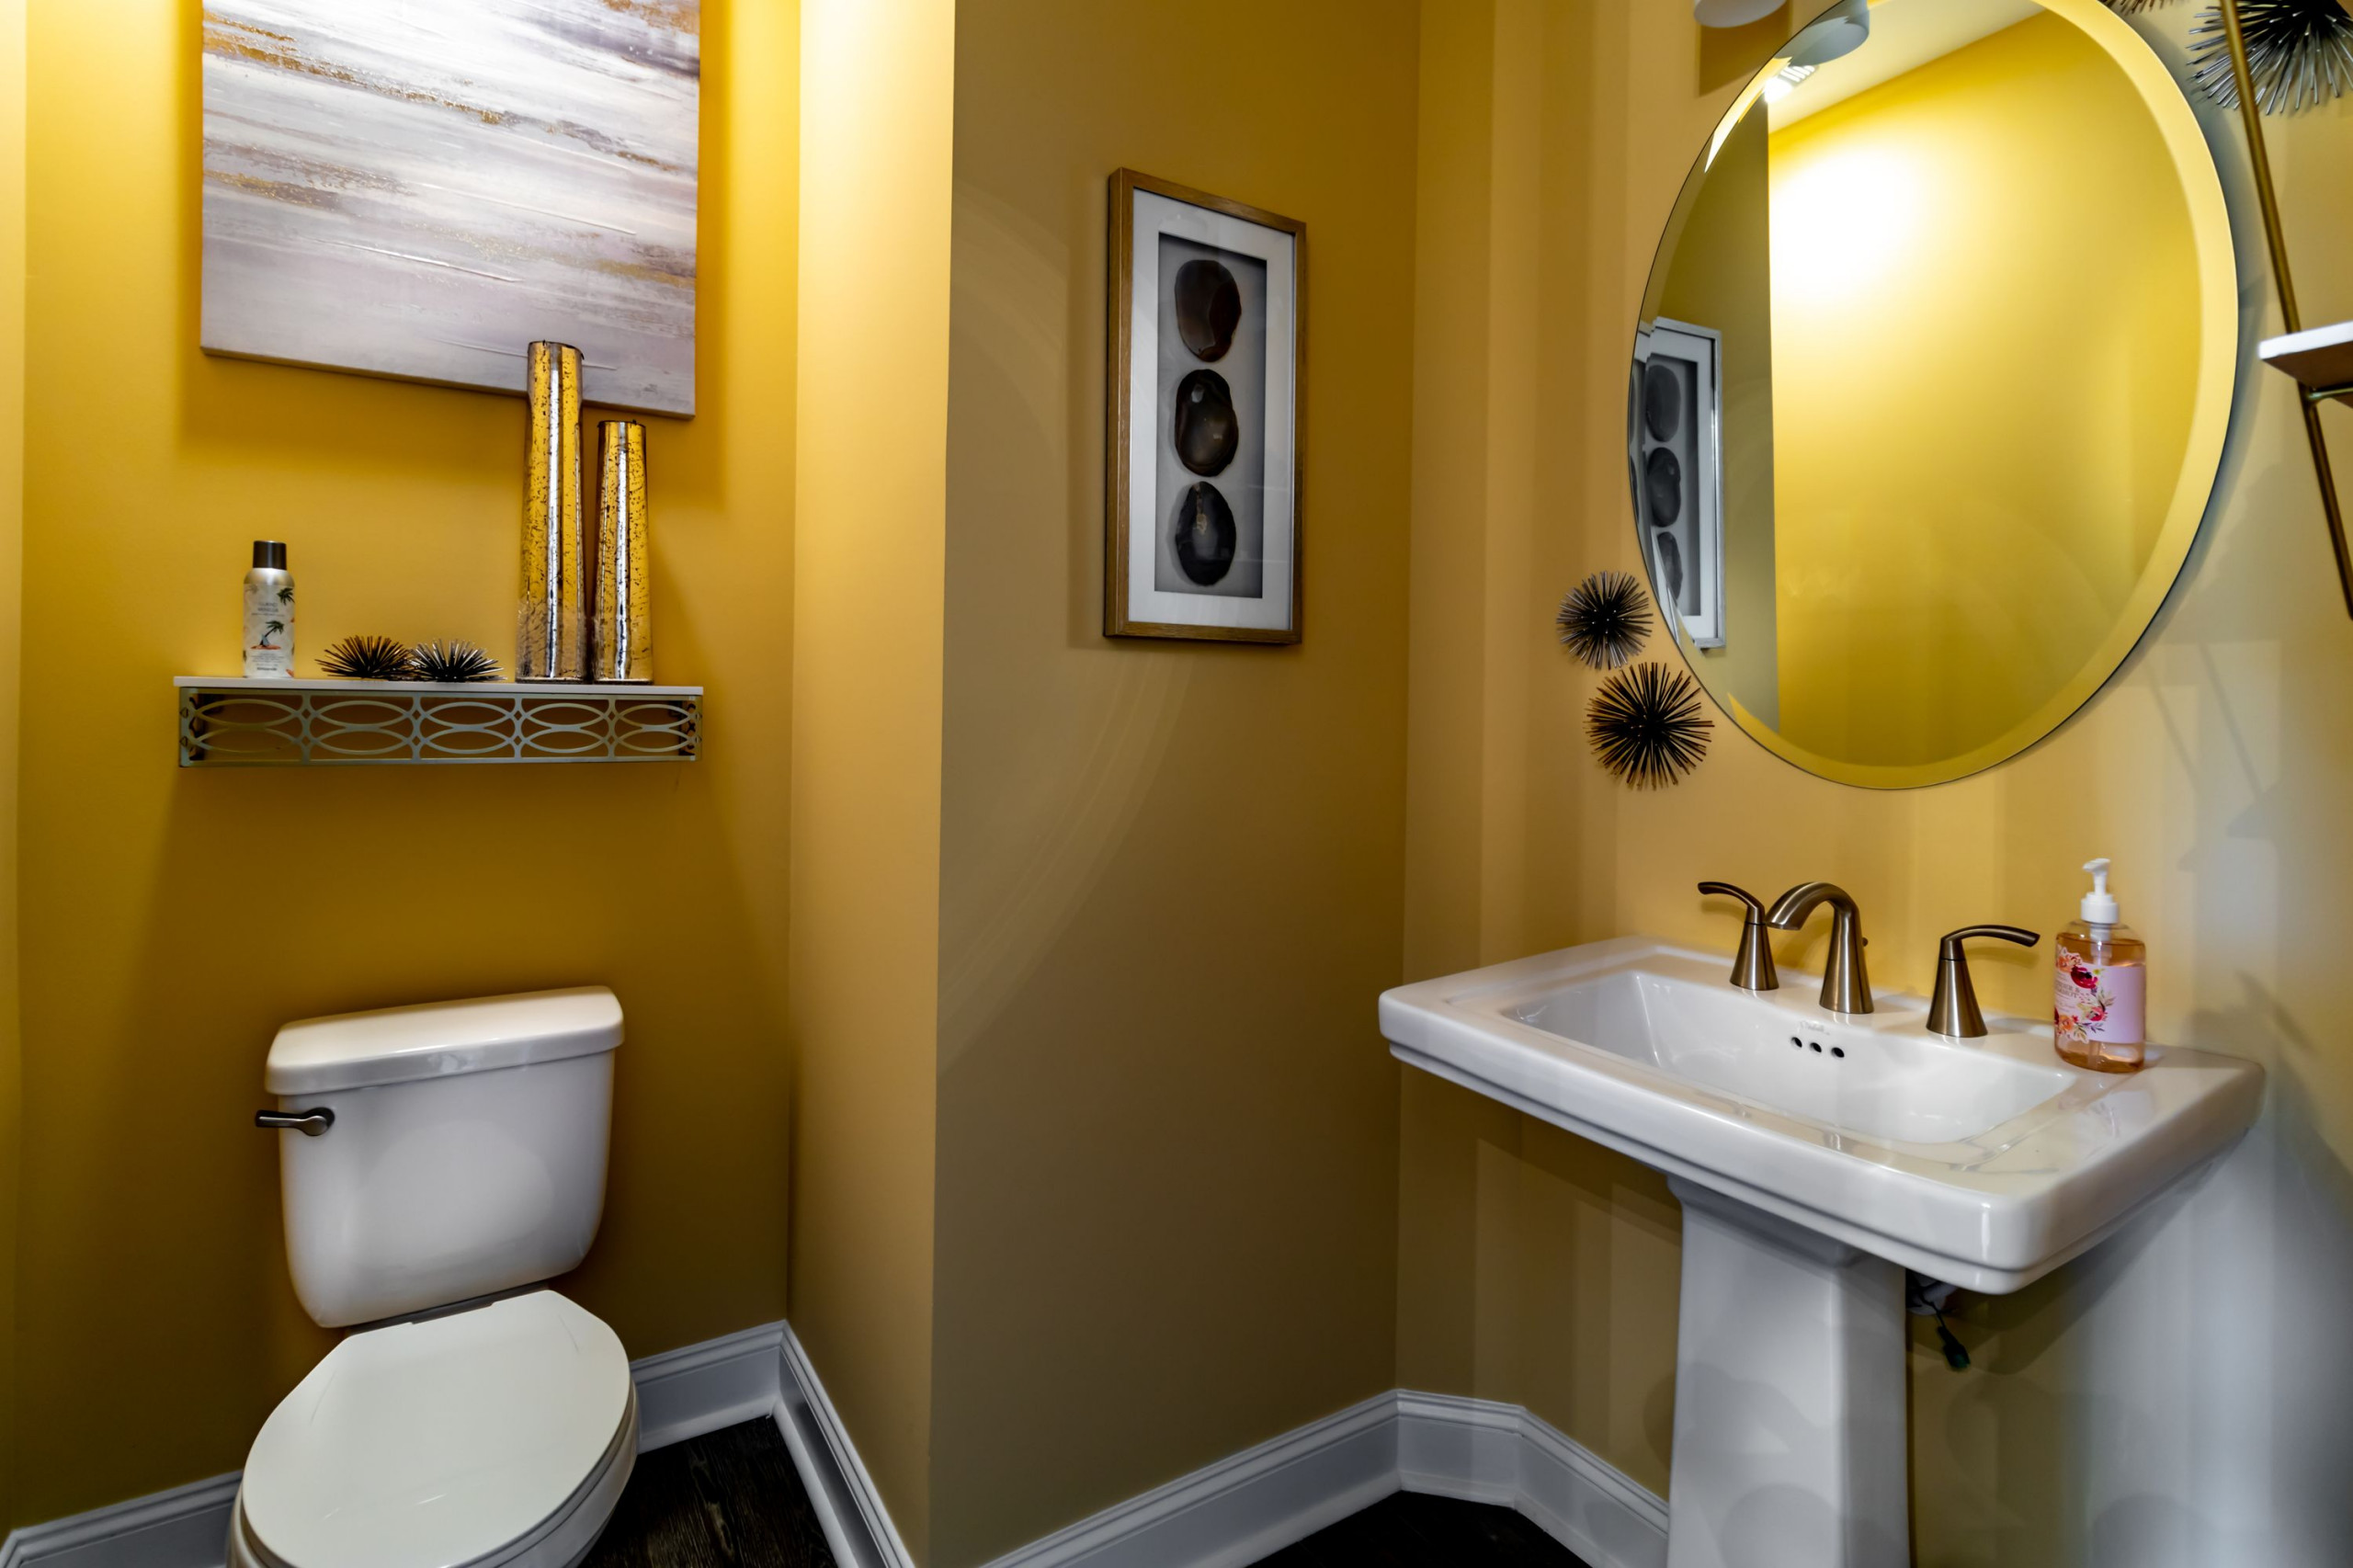 Transitional Home Transformation - Guest Baths